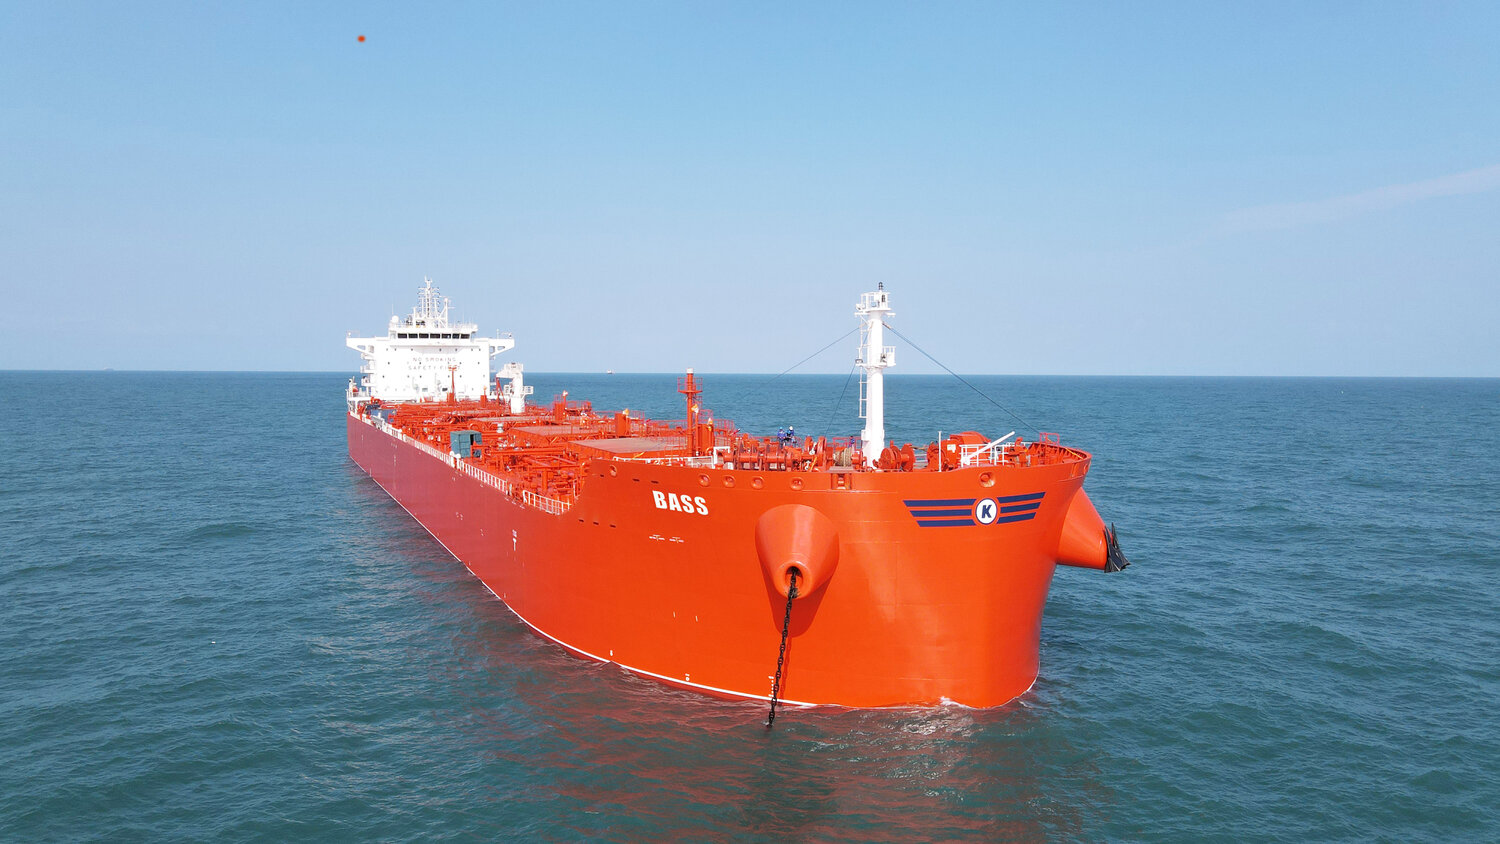 Klaveness Combination Carriers’s newbuilding program near completion with the delivery of the seventh CLEANBU vessel